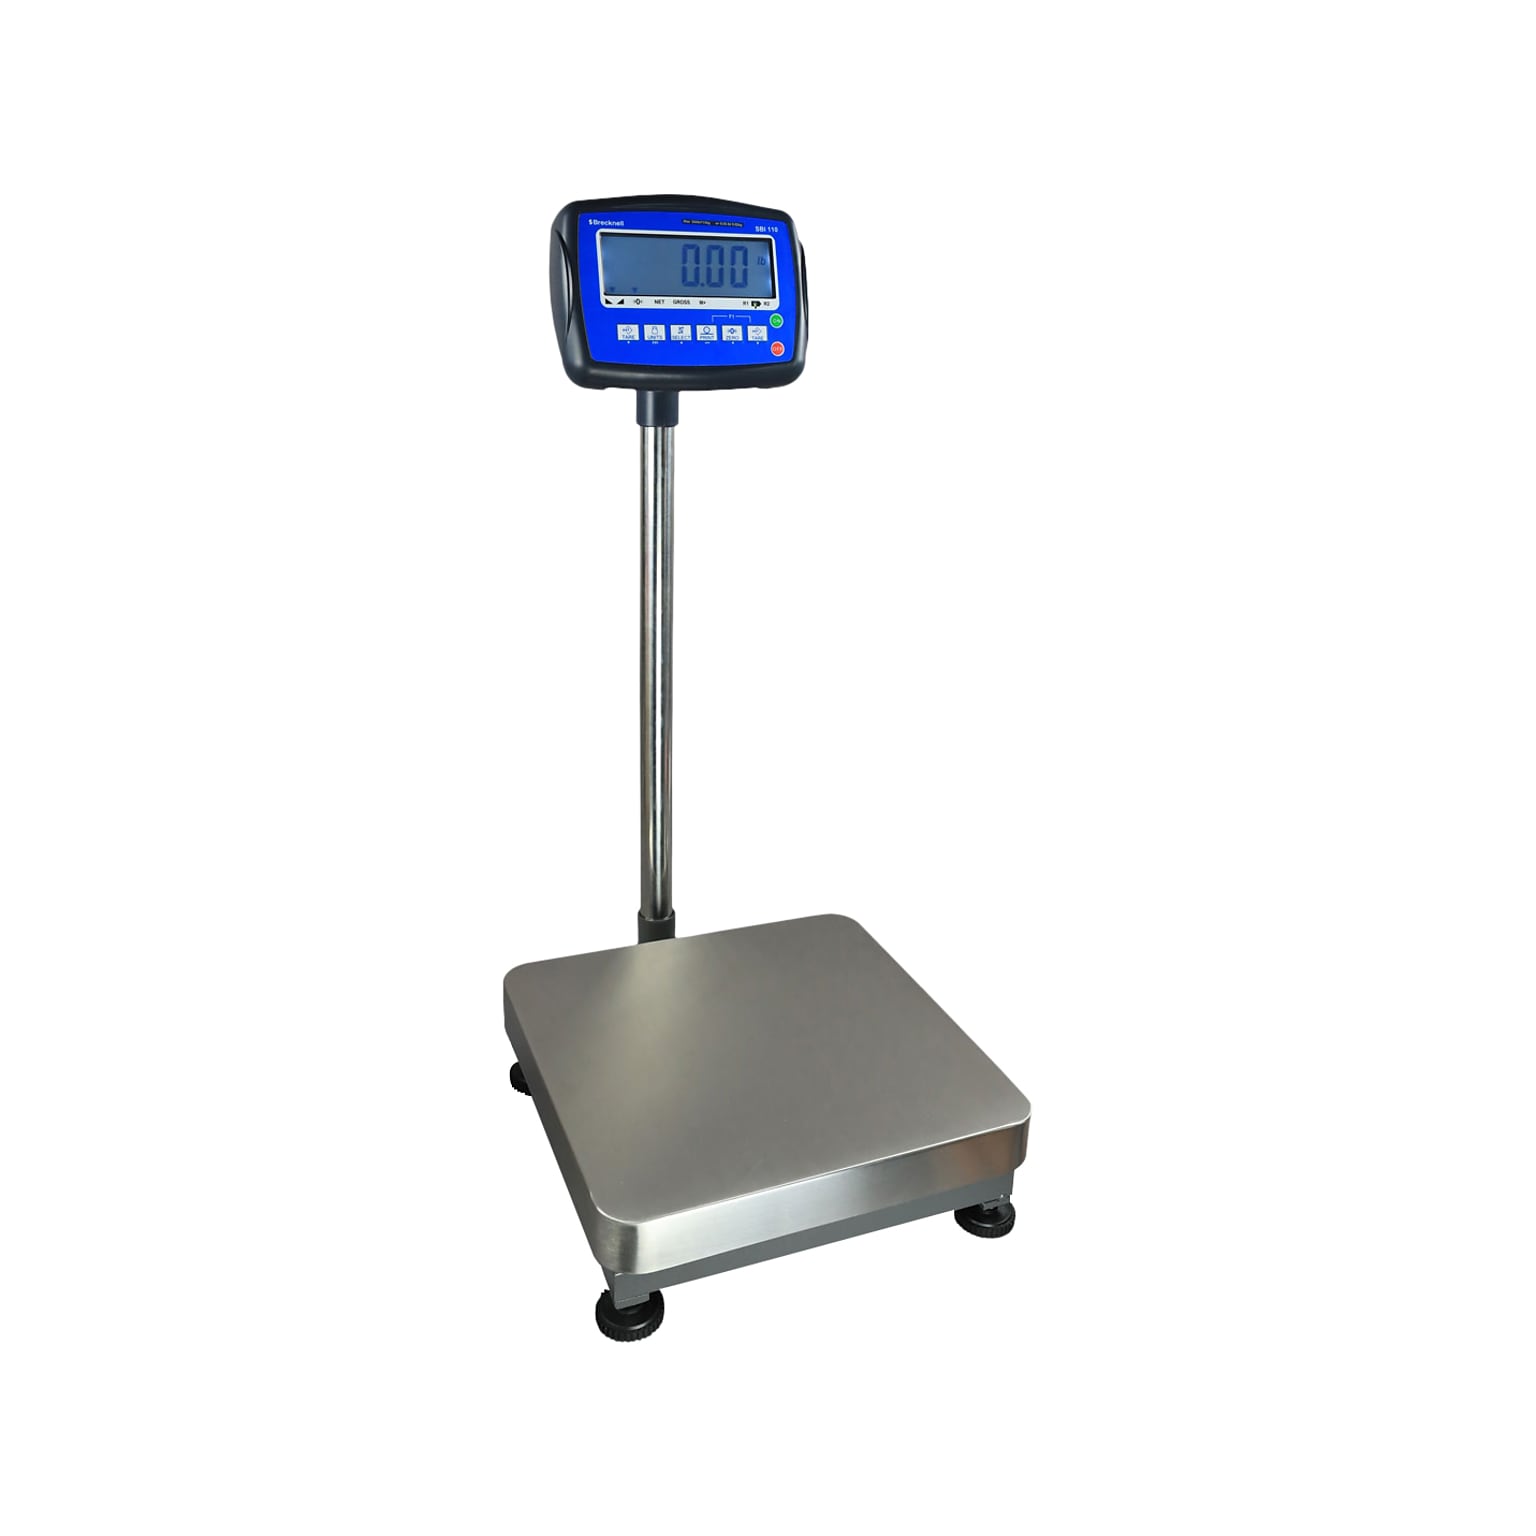 Brecknell Bench System 3900LP, Electronic Scale, 600 lbs. Capacity